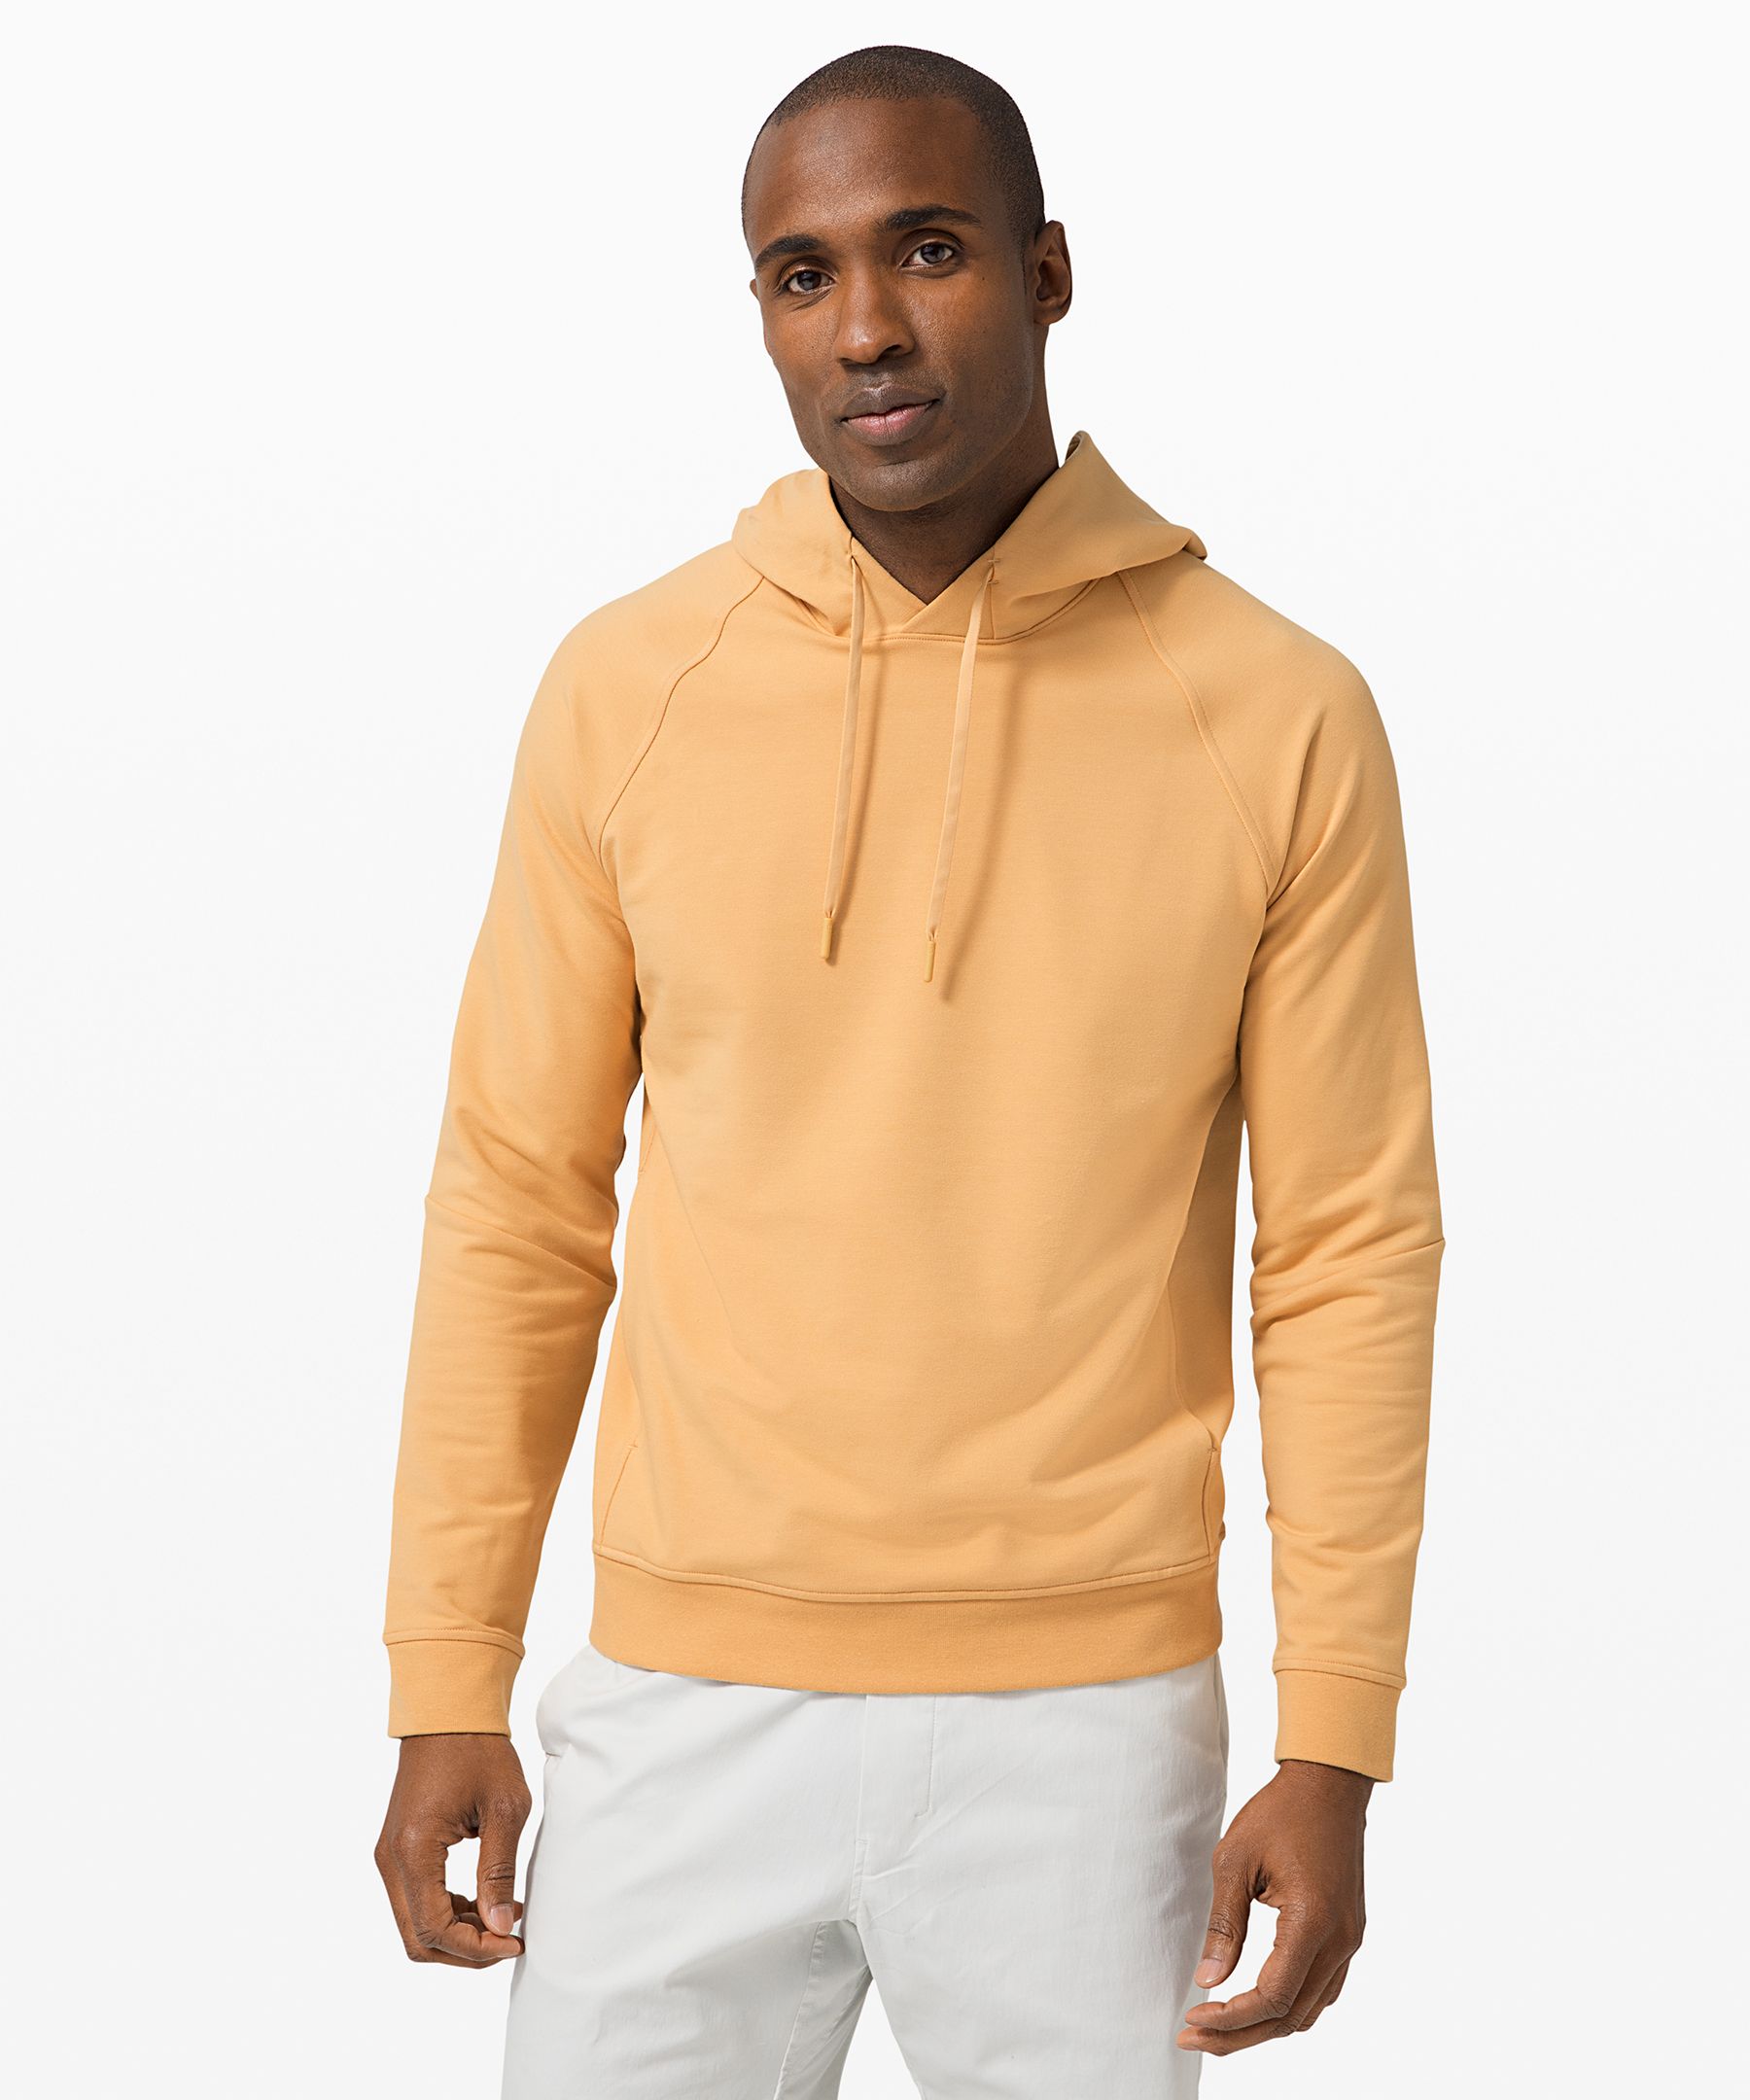 Lululemon City Sweat Pullover Hoodie French Terry In Beeswax